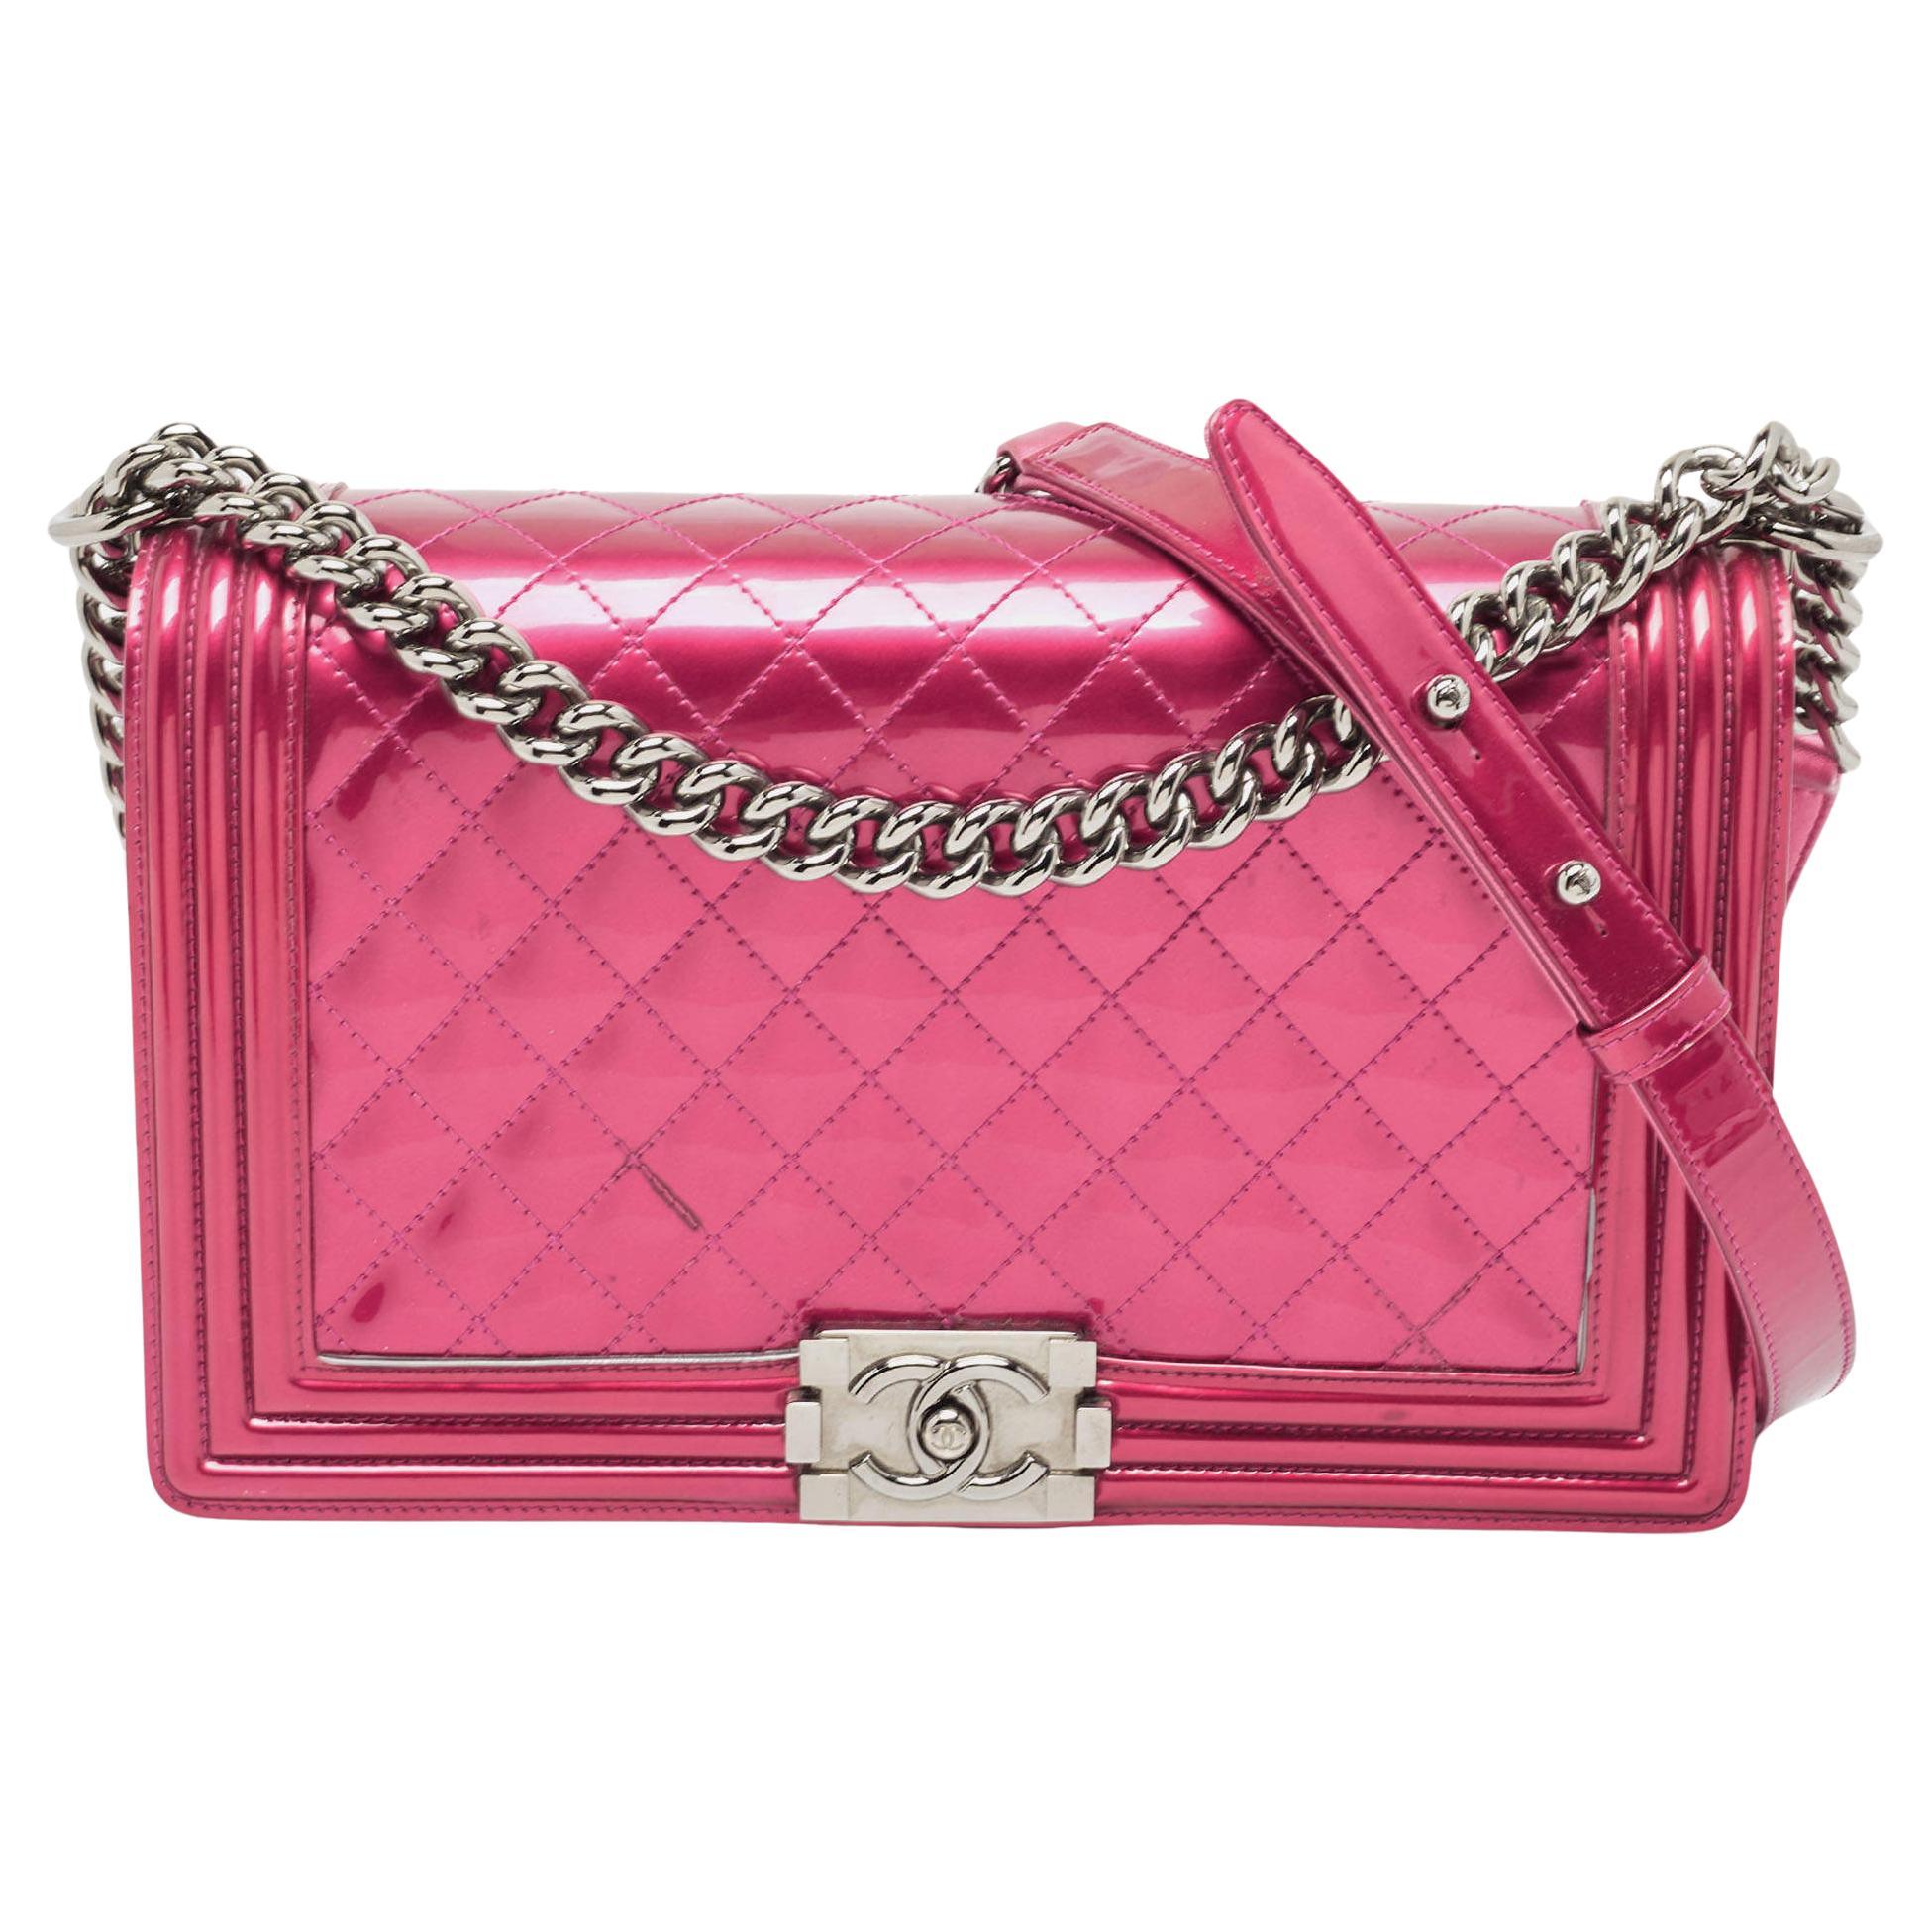 Chanel Pink Quilted Patent Leather New Medium Boy Flap Bag For Sale